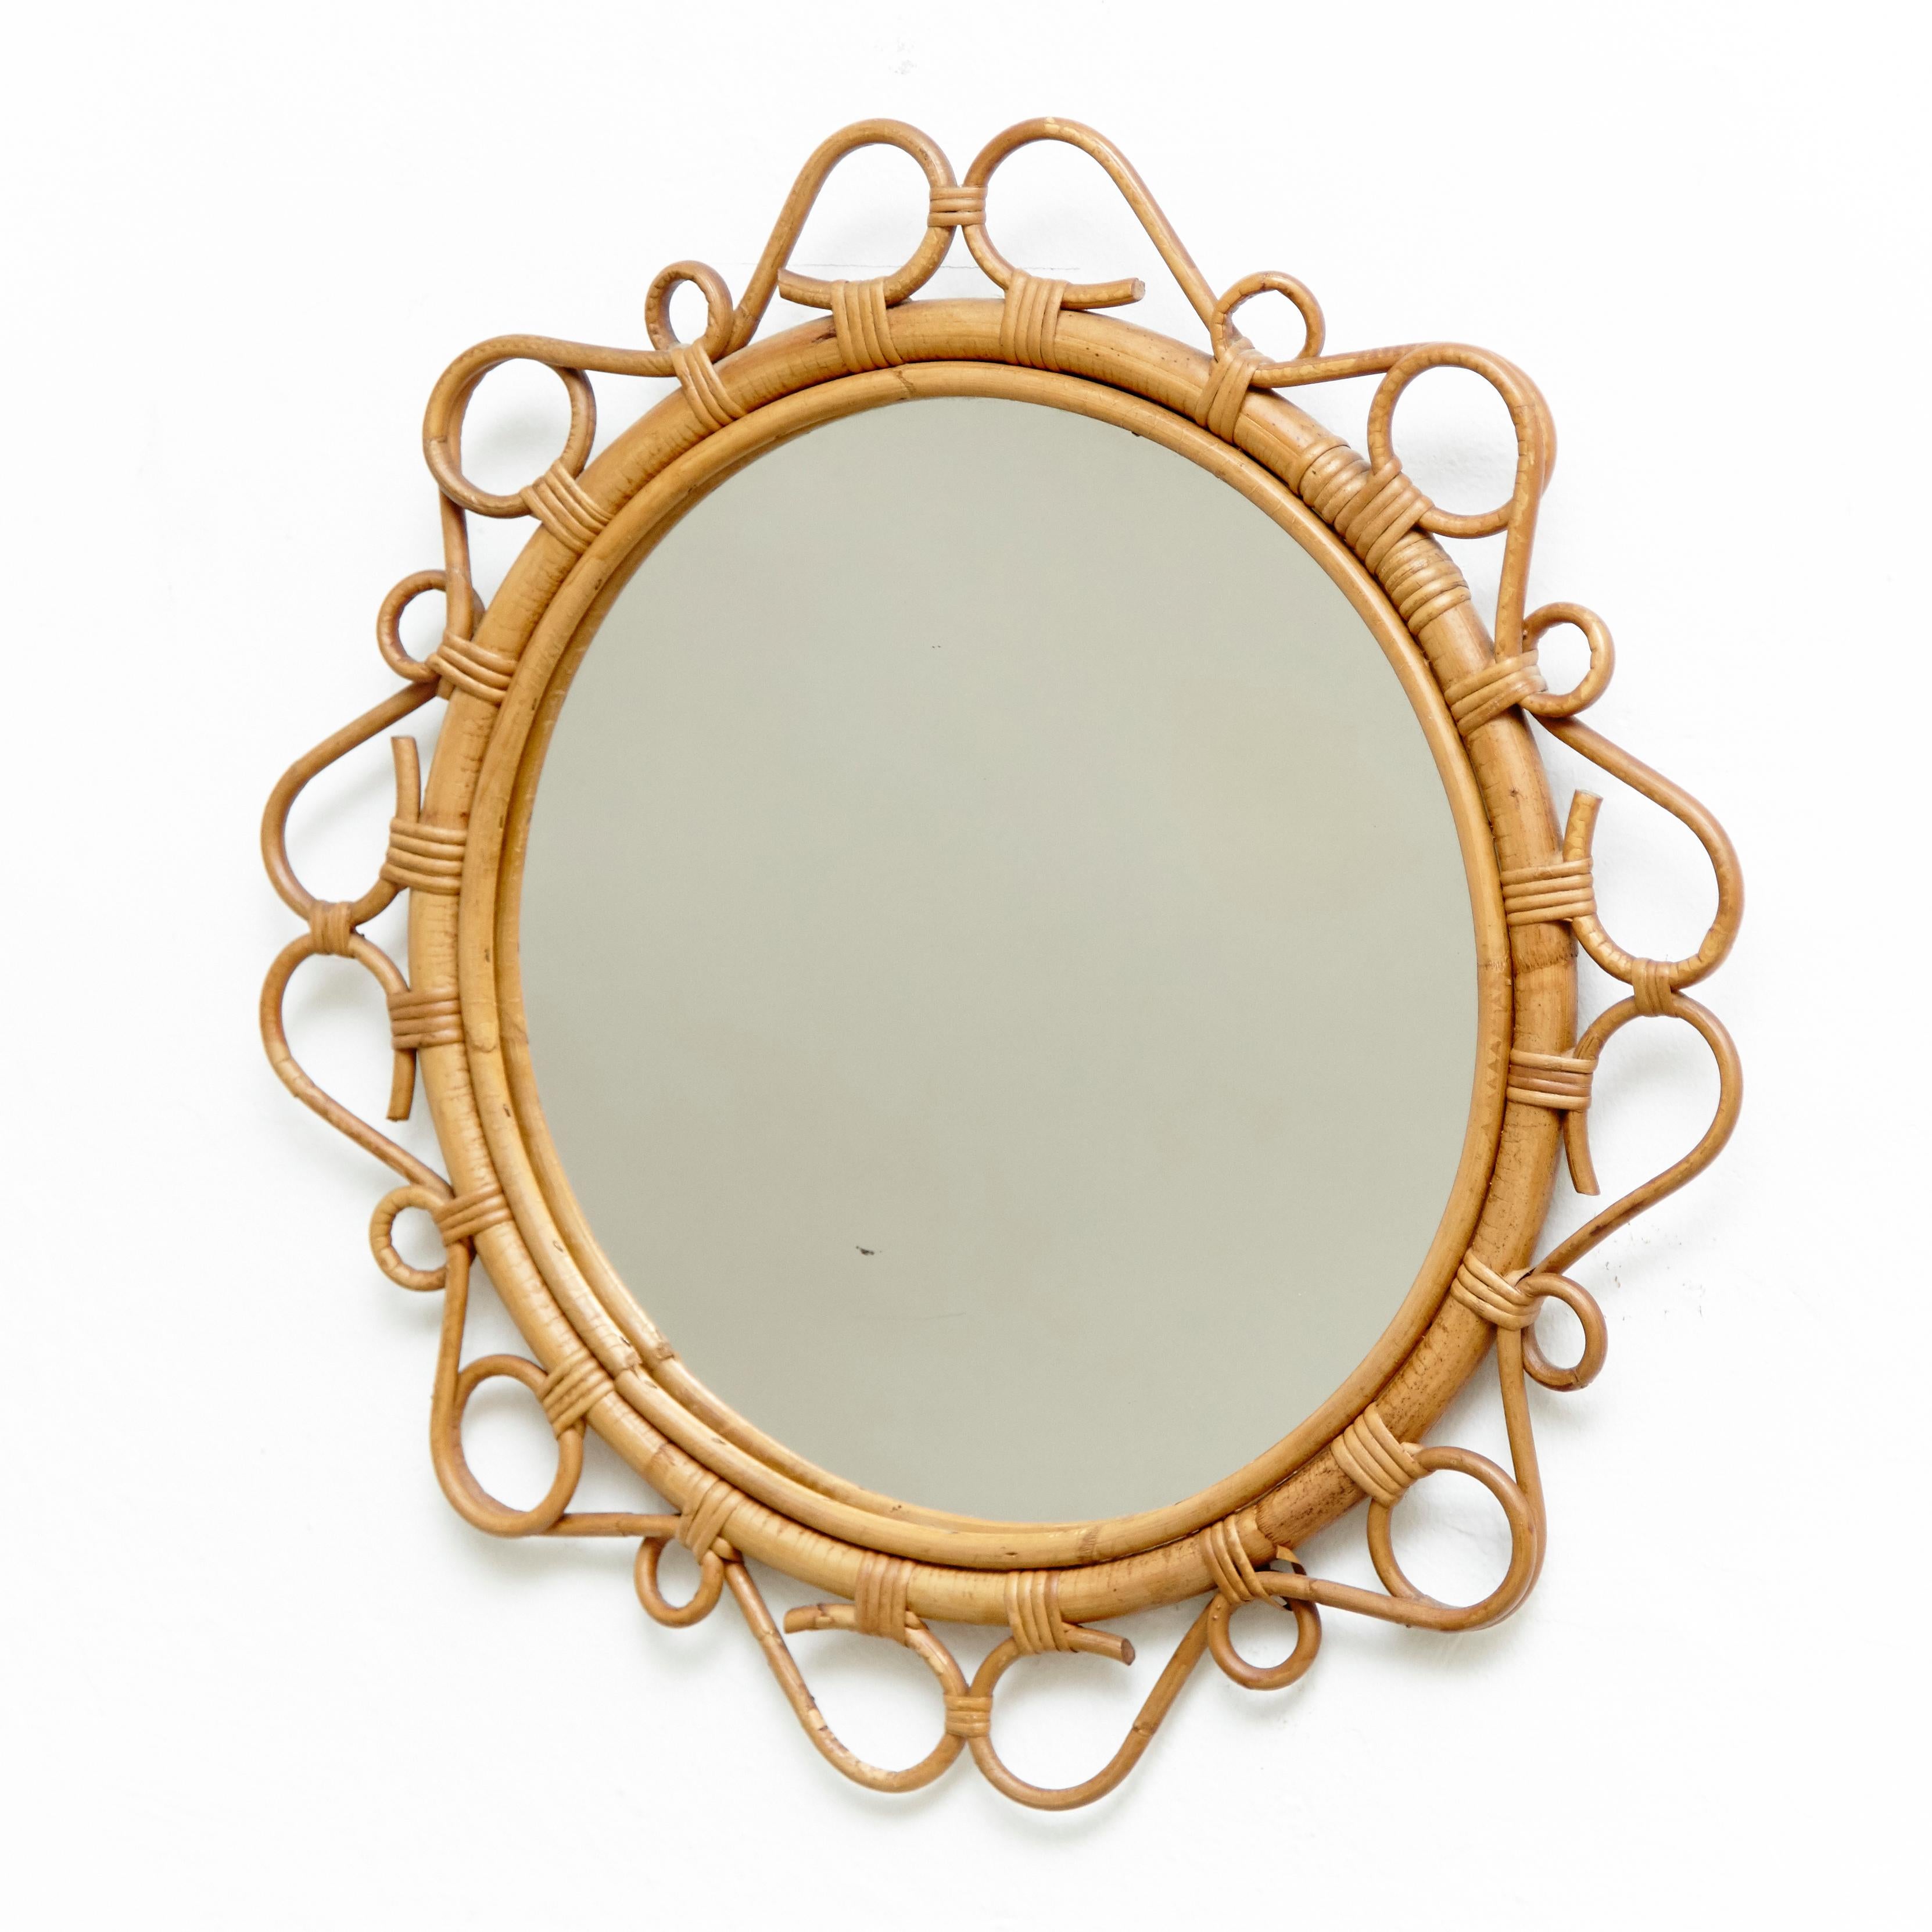 Mid-Century Modern mirror bamboo and rattan handcrafted, circa 1960
Traditionally manufactured in French.
By unknown designer.

In original condition with minor wear consistent of age and use, preserving a beautiful patina.

